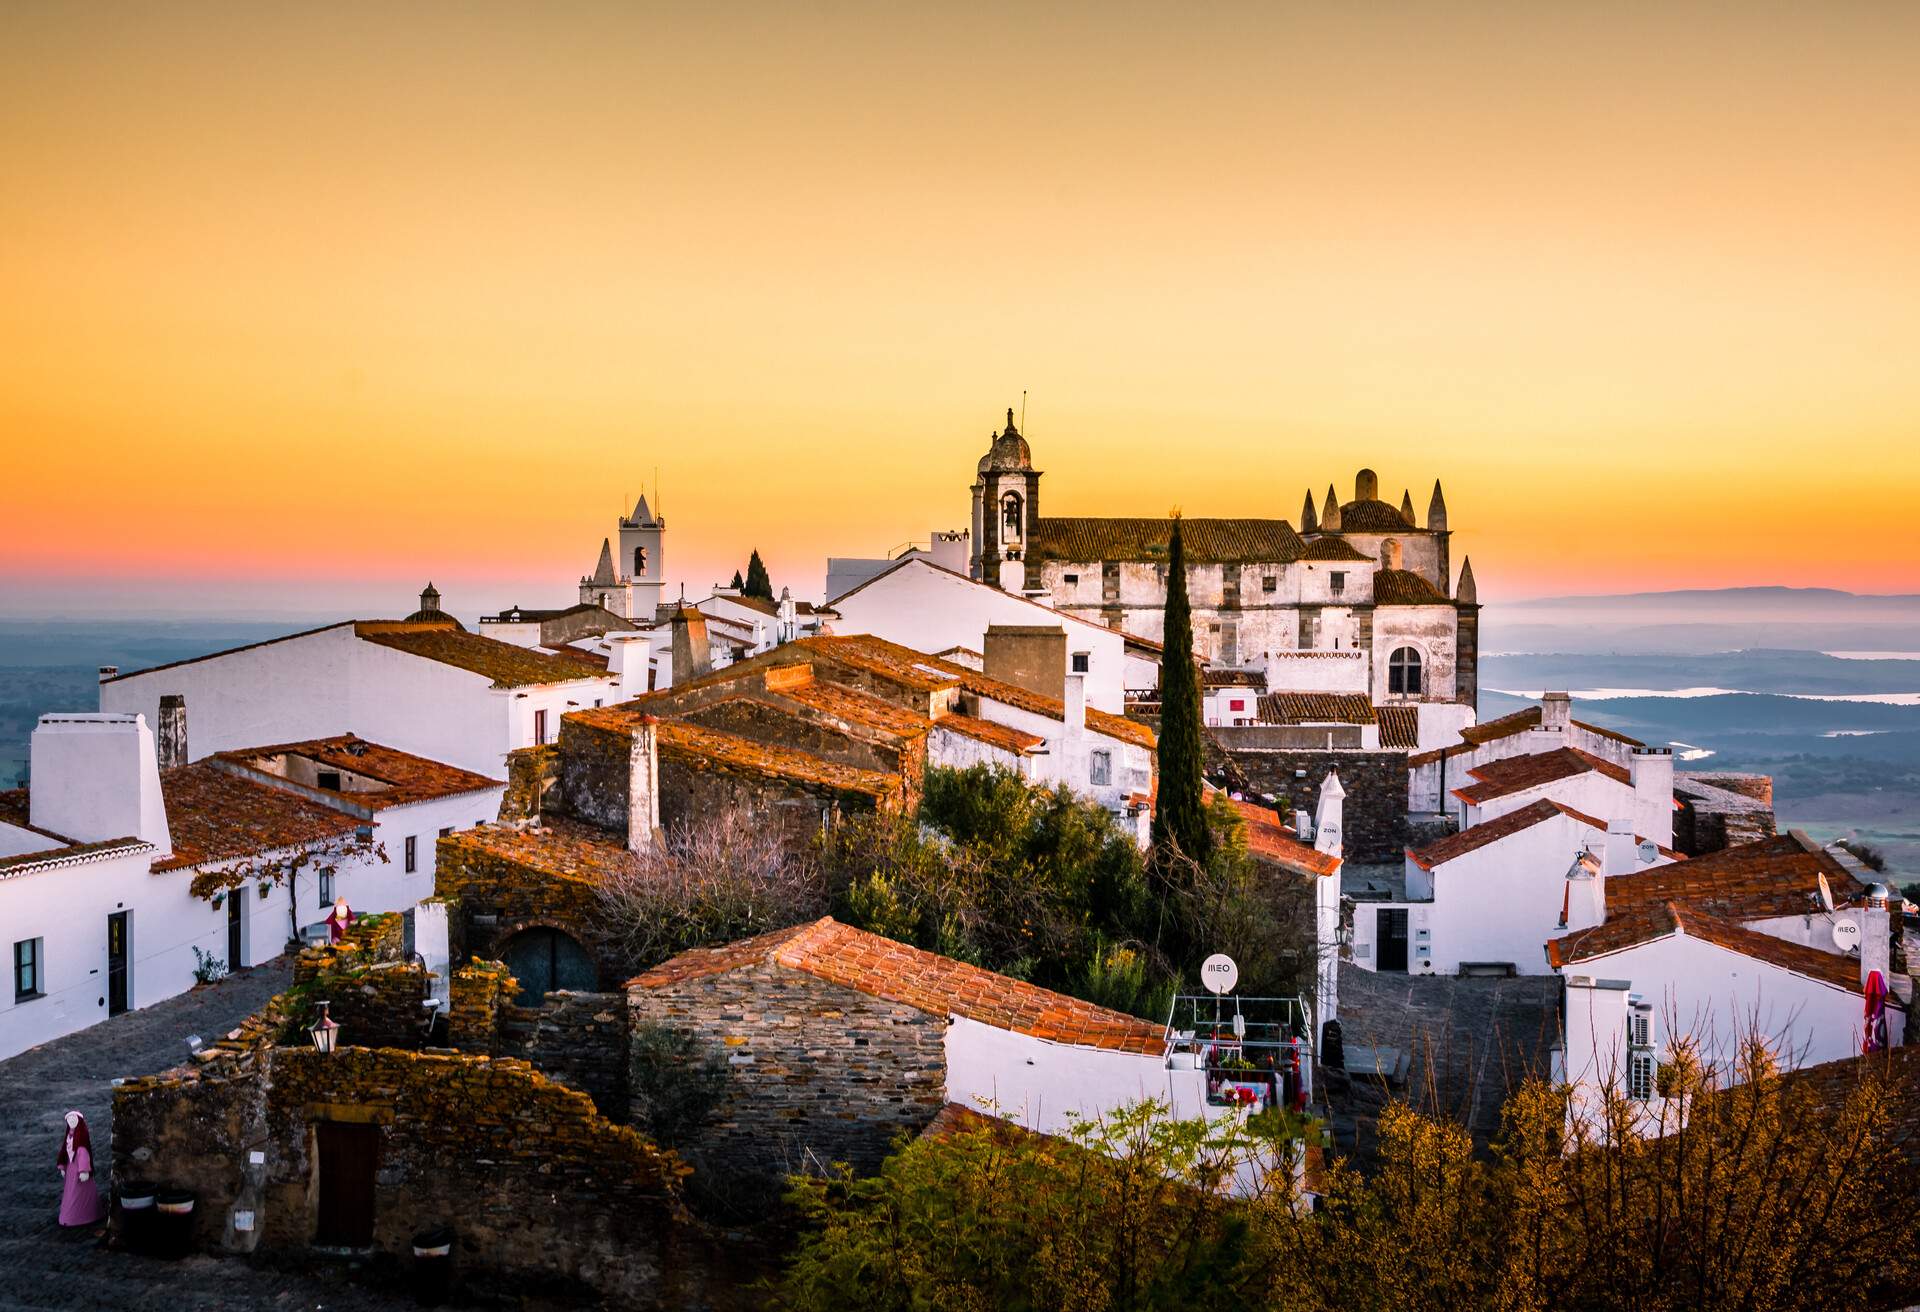 Monsaraz. Stunning sunrise photo of Monsaraz village in Alentejo region, Portugal..A Castle and white houses village on top of the mountain.; Shutterstock ID 549656779; purchase_order: ; job: ; client: ; other: